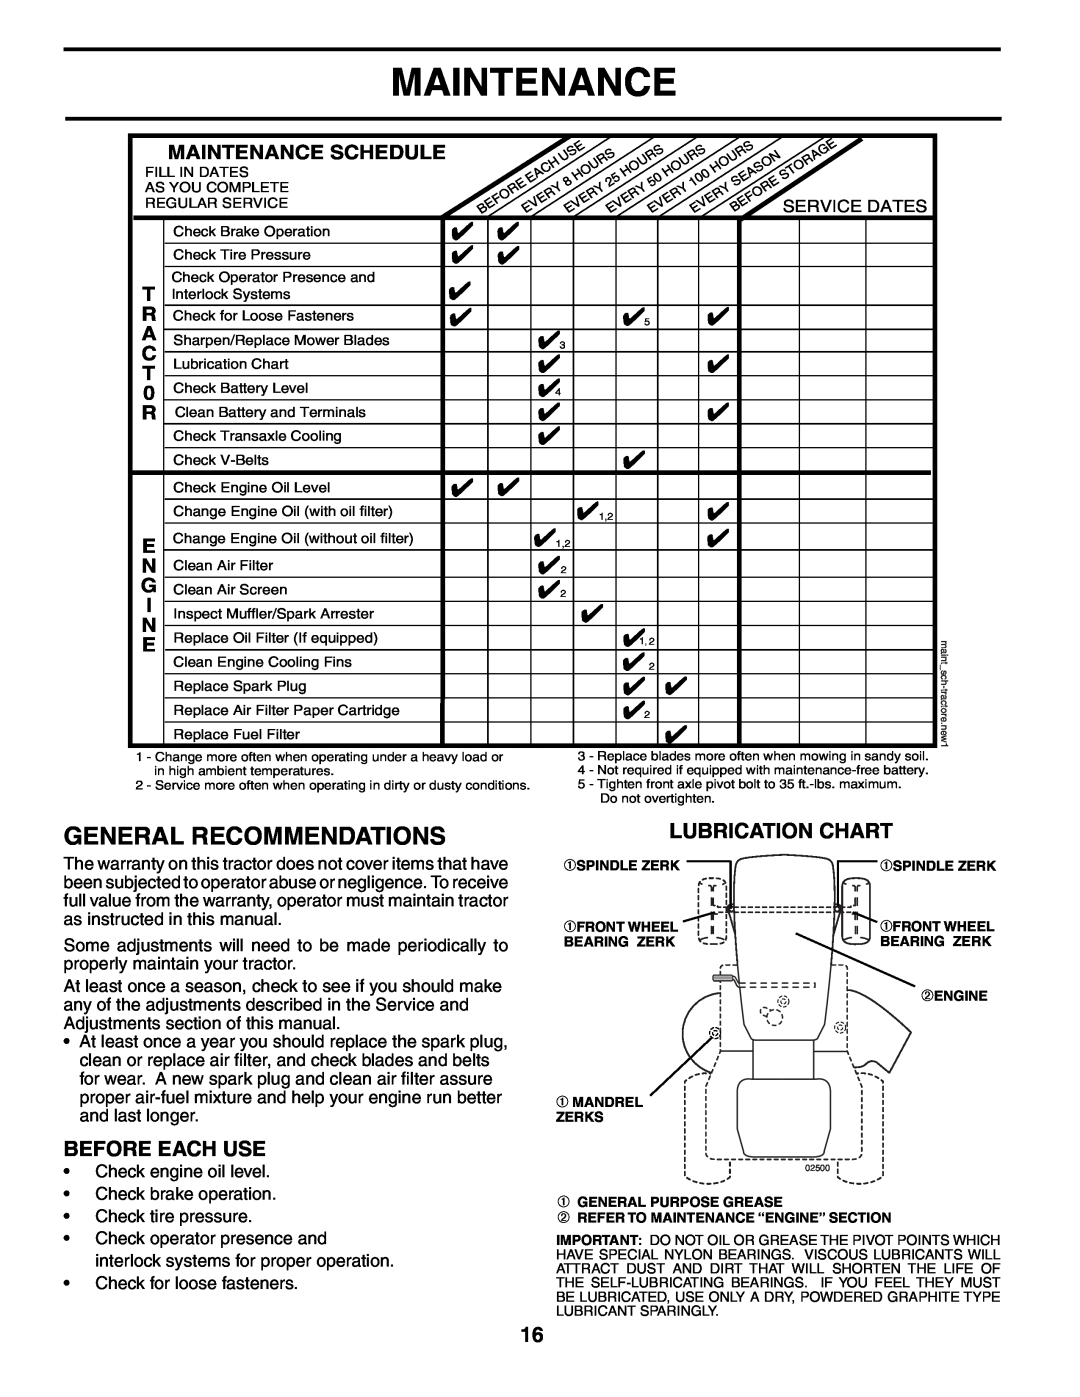 Poulan PD20PH48STB owner manual General Recommendations, Lubrication Chart, Before Each Use, Maintenance Schedule 